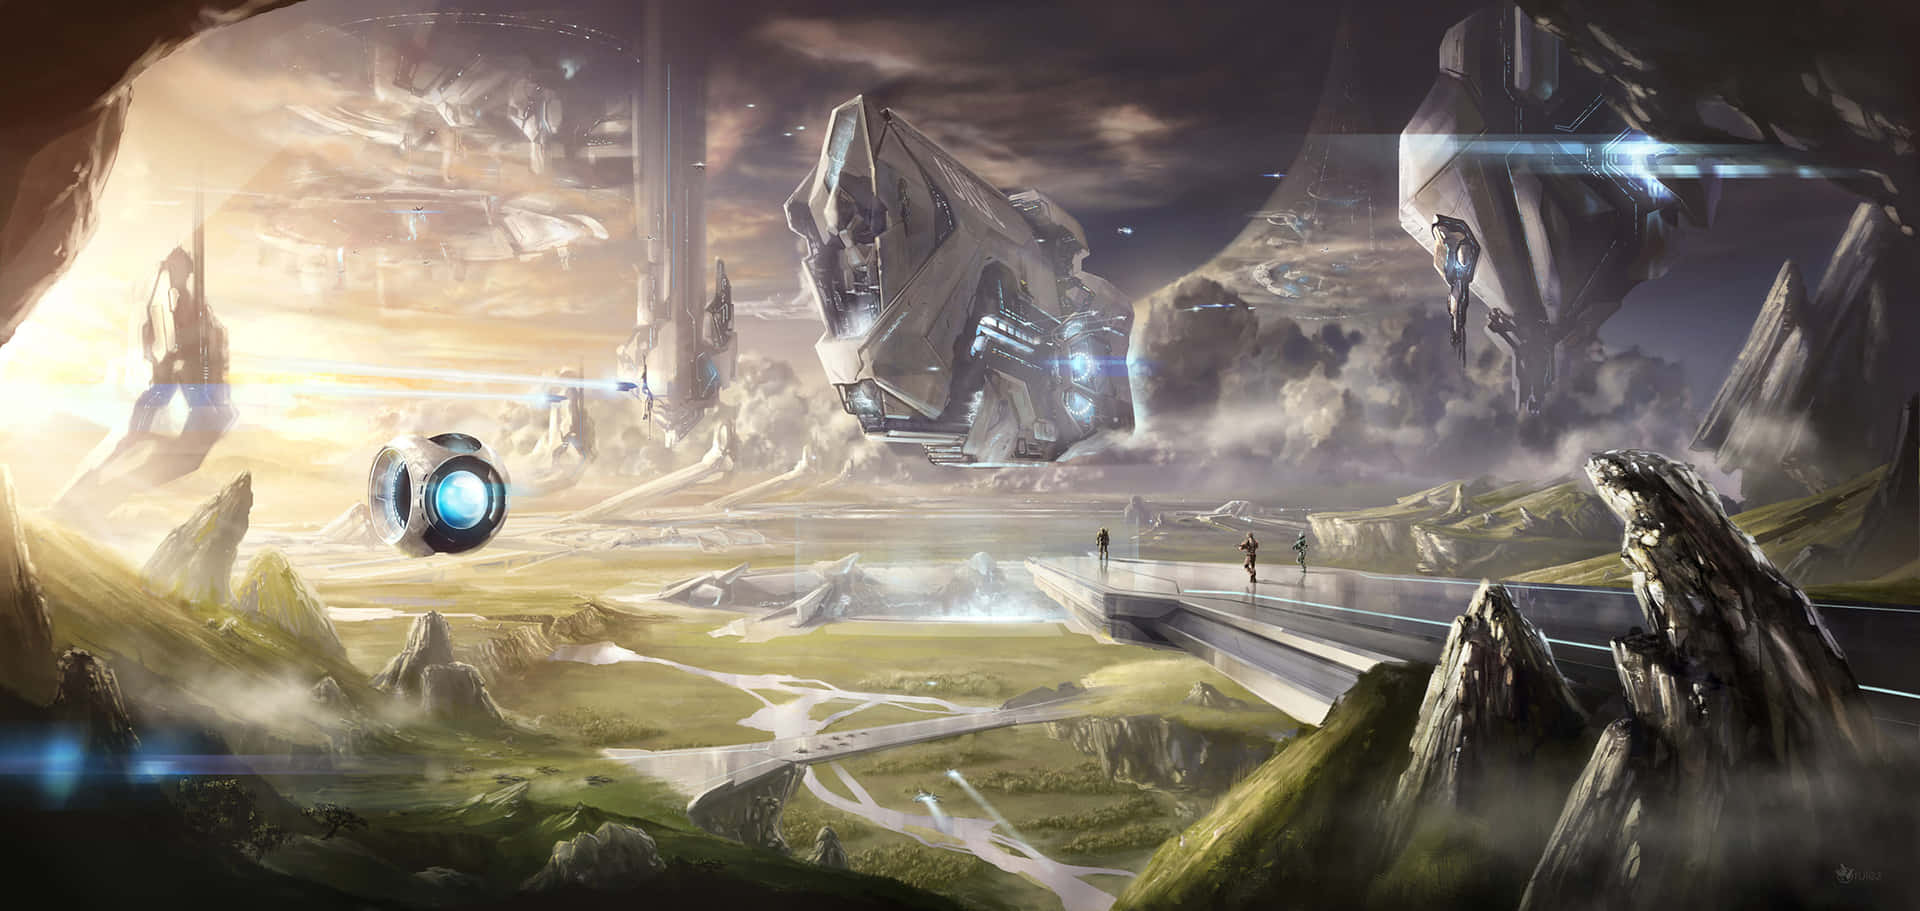 Cool Halo Soldiers In Futuristic Planet Wallpaper